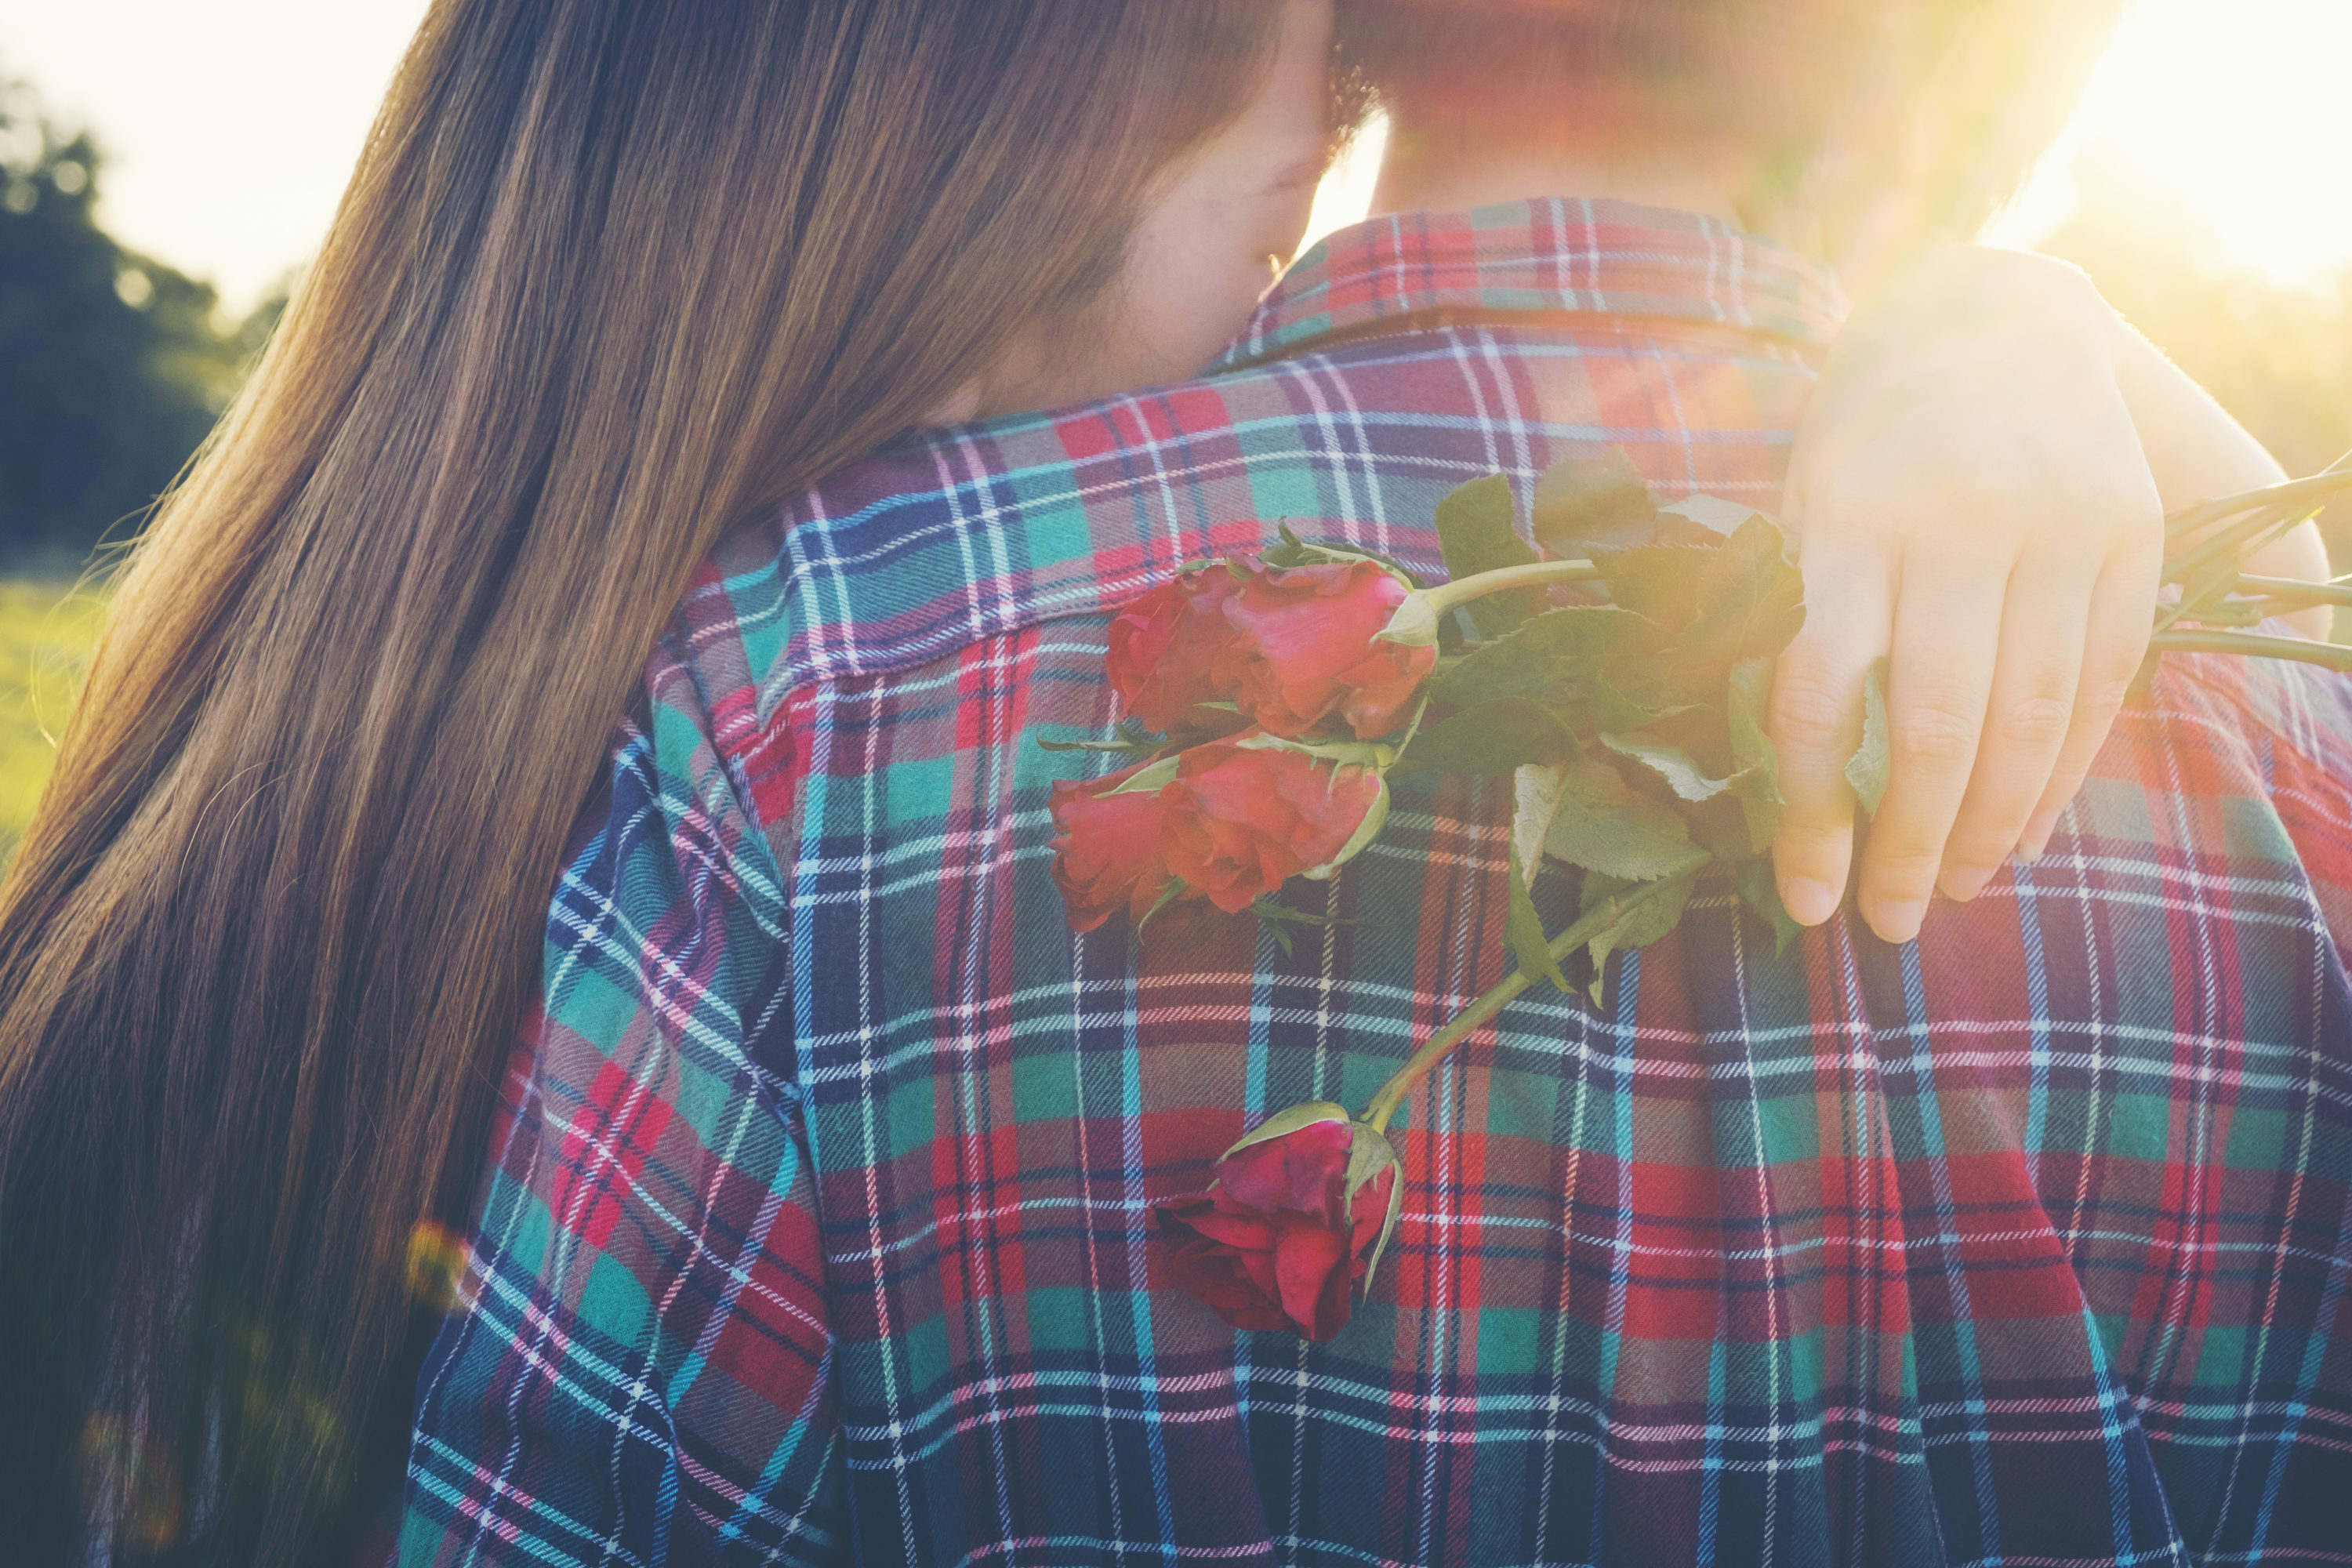 A young women holding roses embraces a man